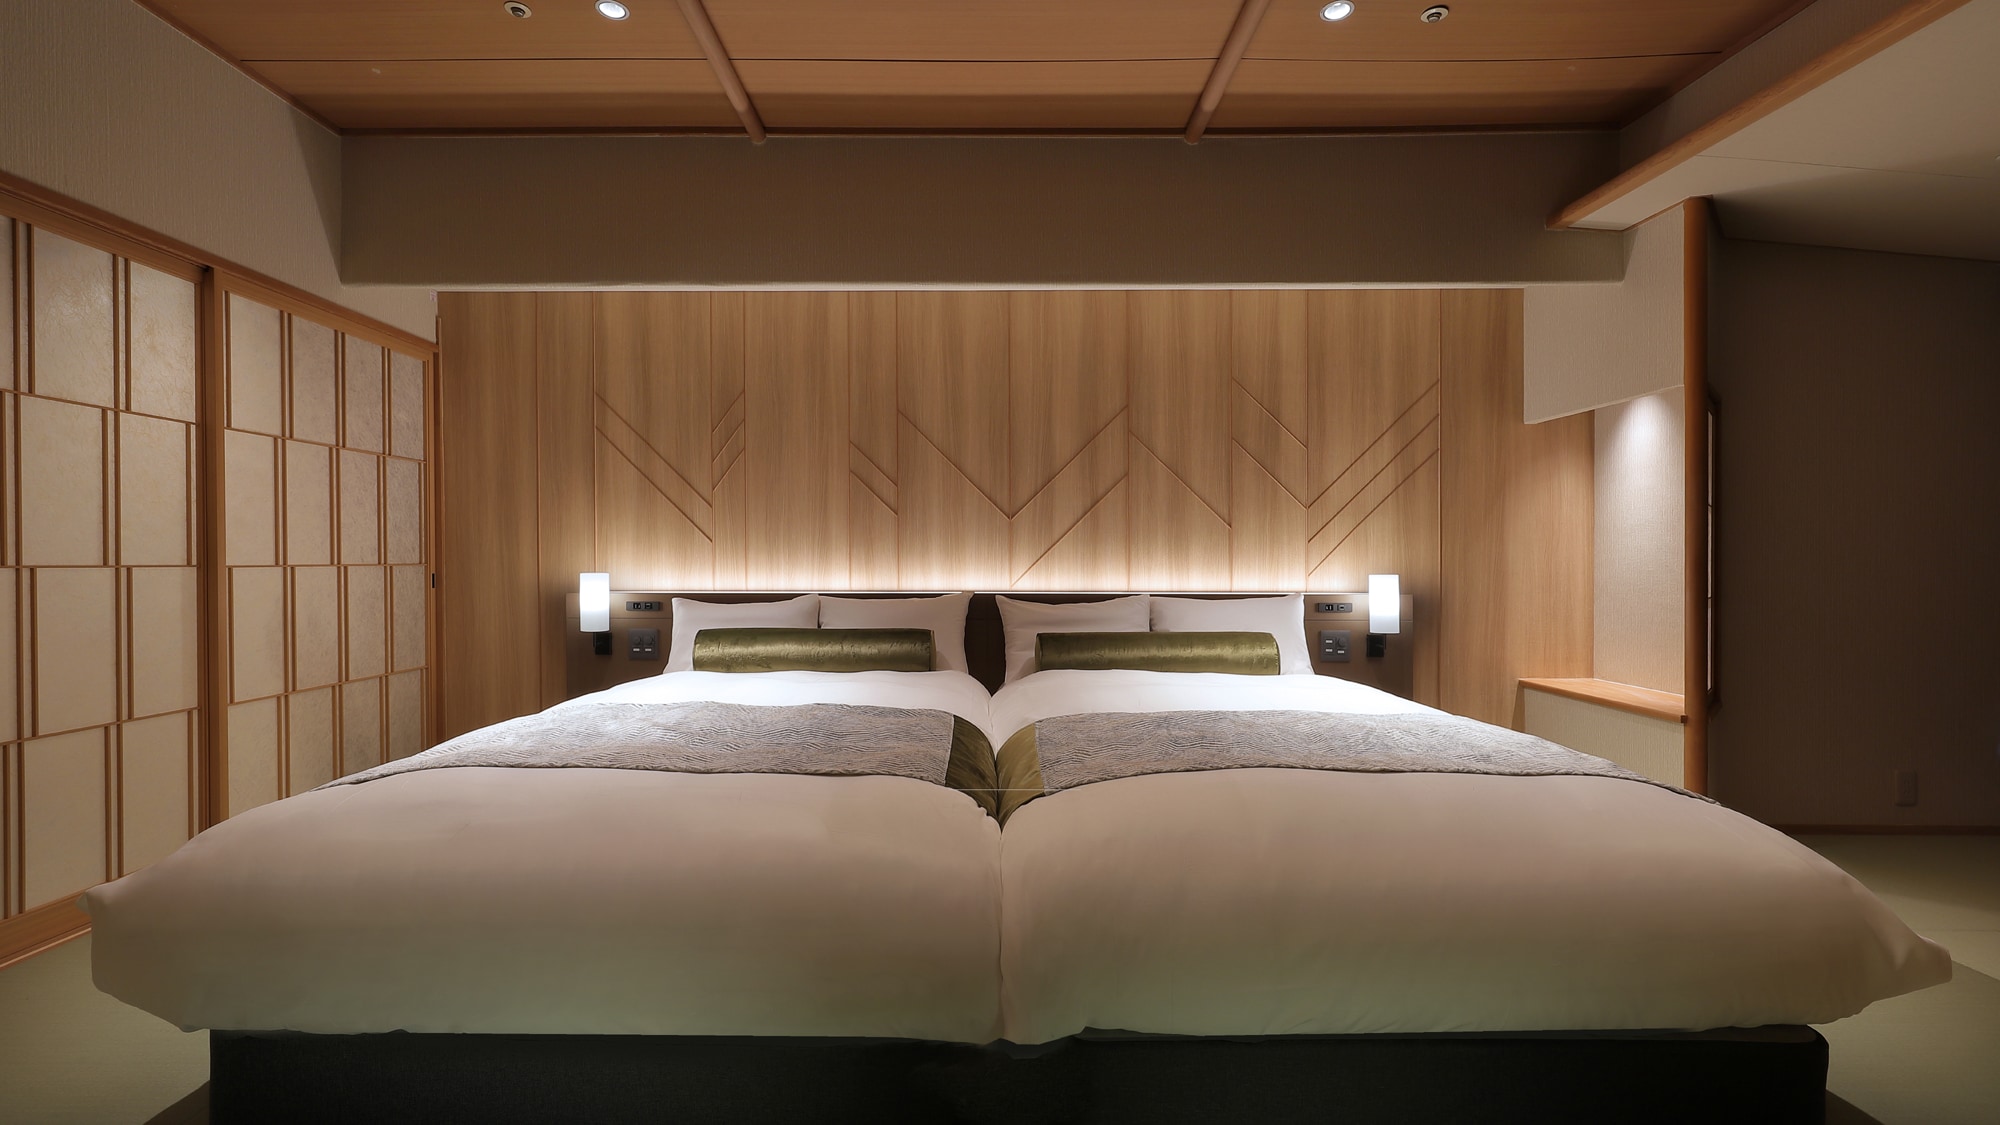 Opened in April 2022! An example of a new guest room "Japanese Twin Matsurin"